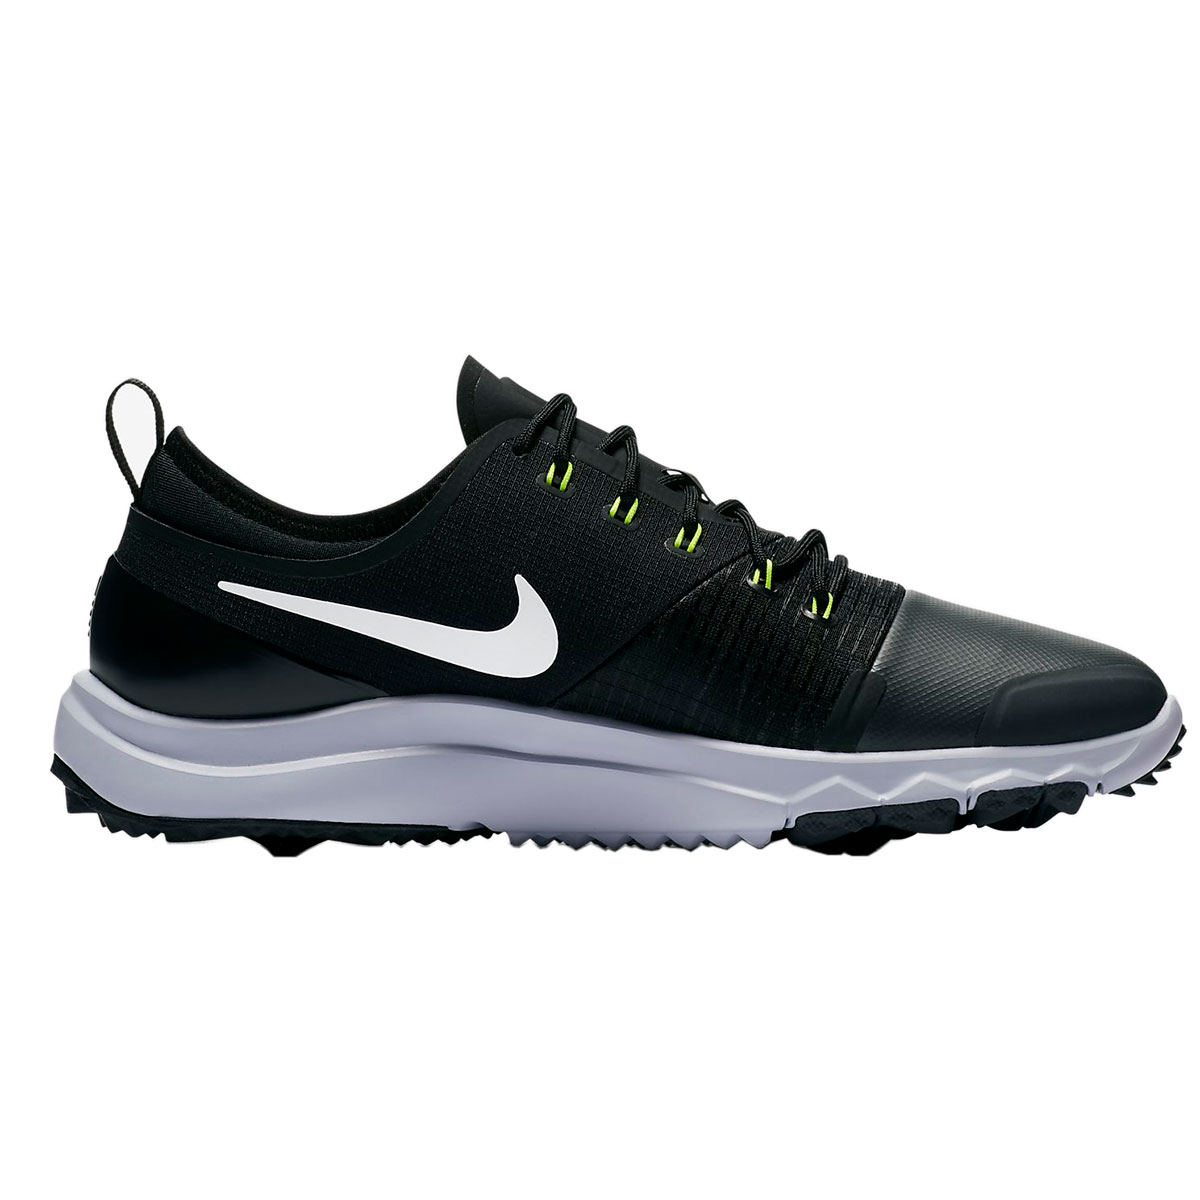 Nike Golf FI Impact 3 Ladies Shoes from 